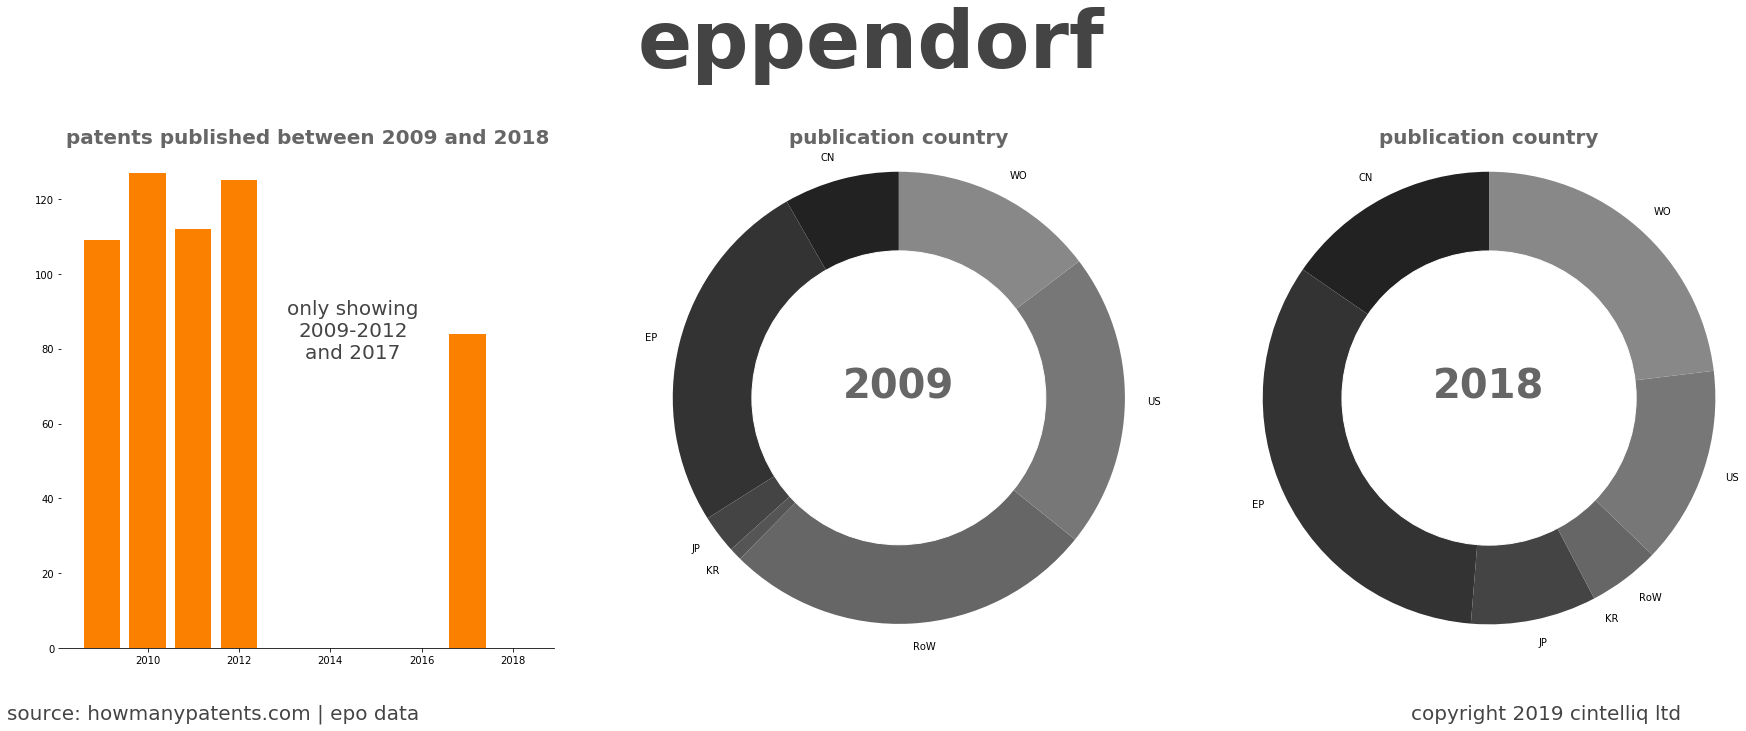 summary of patents for Eppendorf